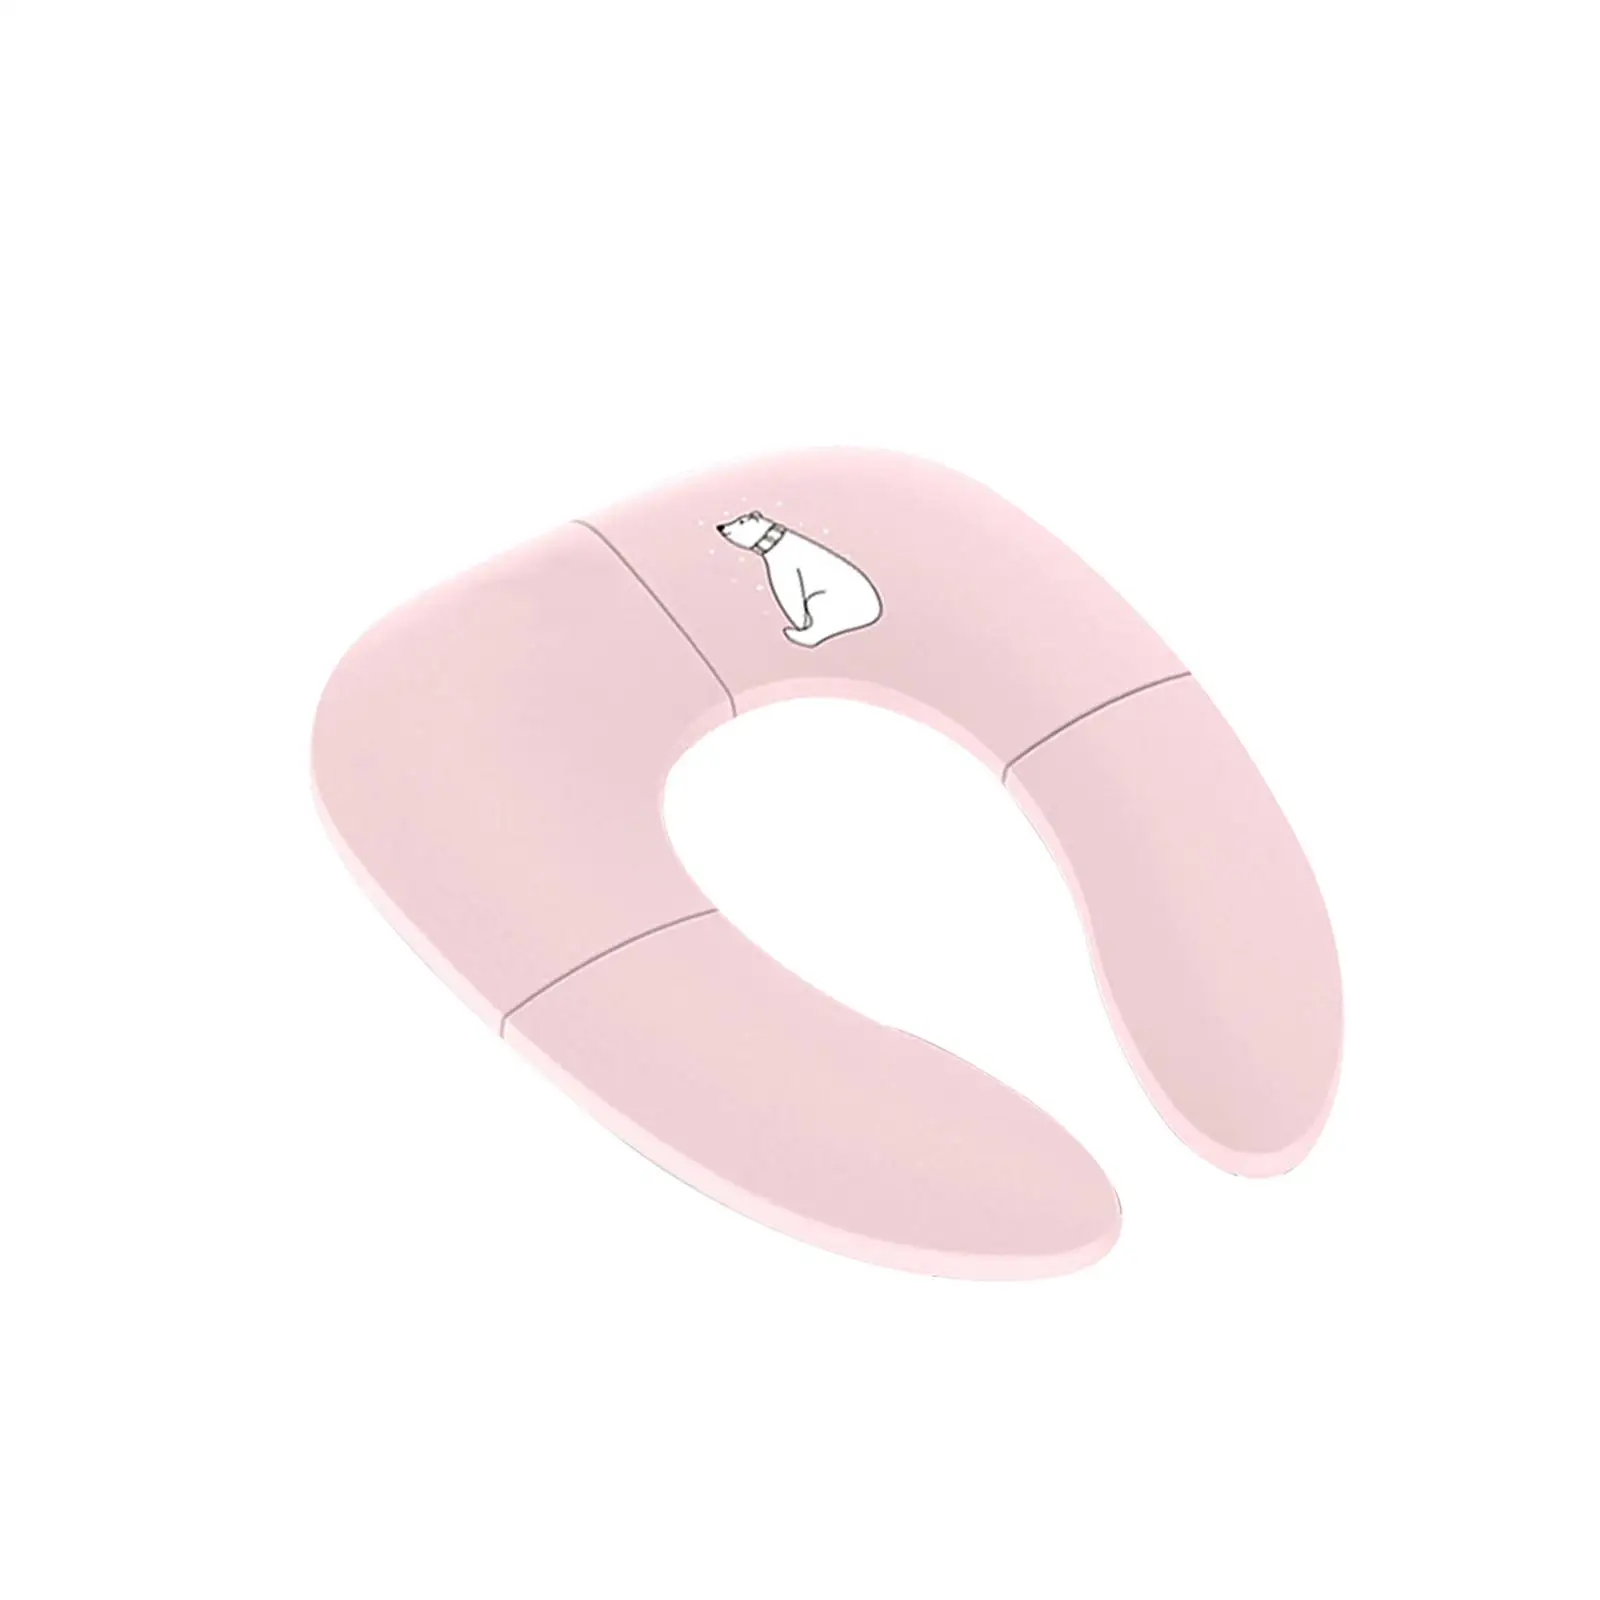 Foldable Toilet Seat Potty Ring Toilet pad for Travel Toddler Girls Kids Child